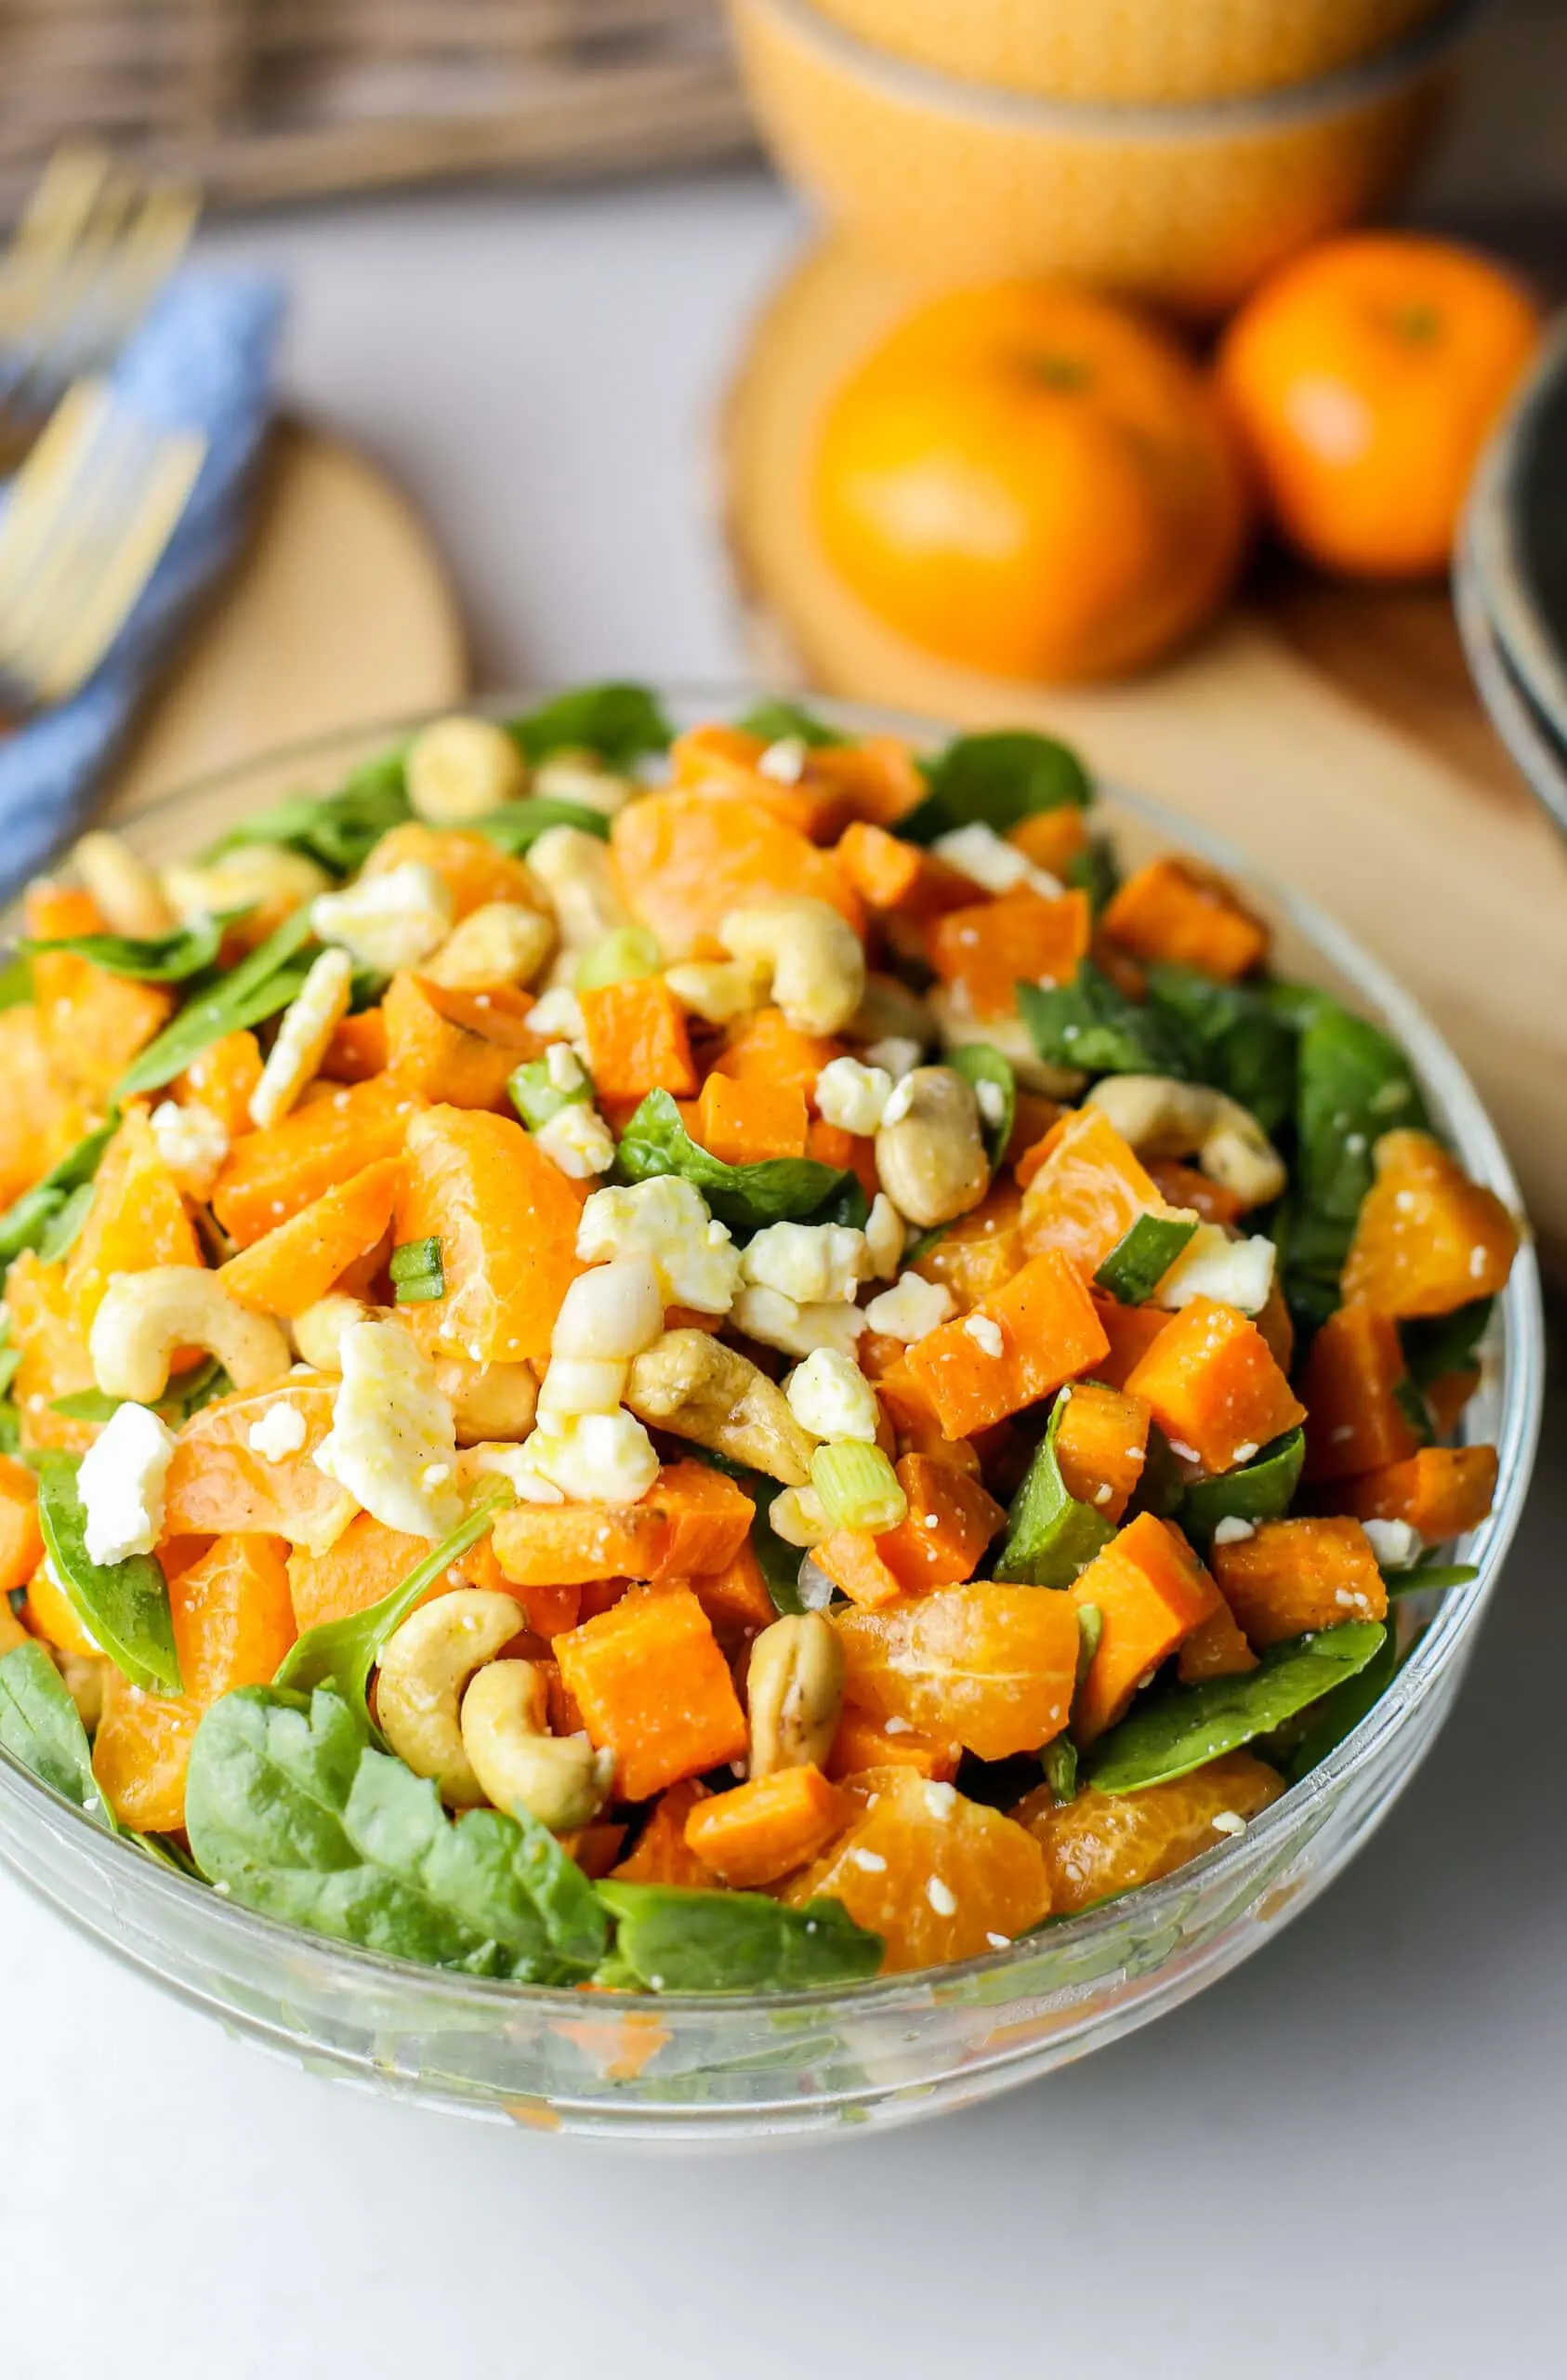 Sweet potato salad with feta, cashews, oranges, and spinach combined in a glass bowl.